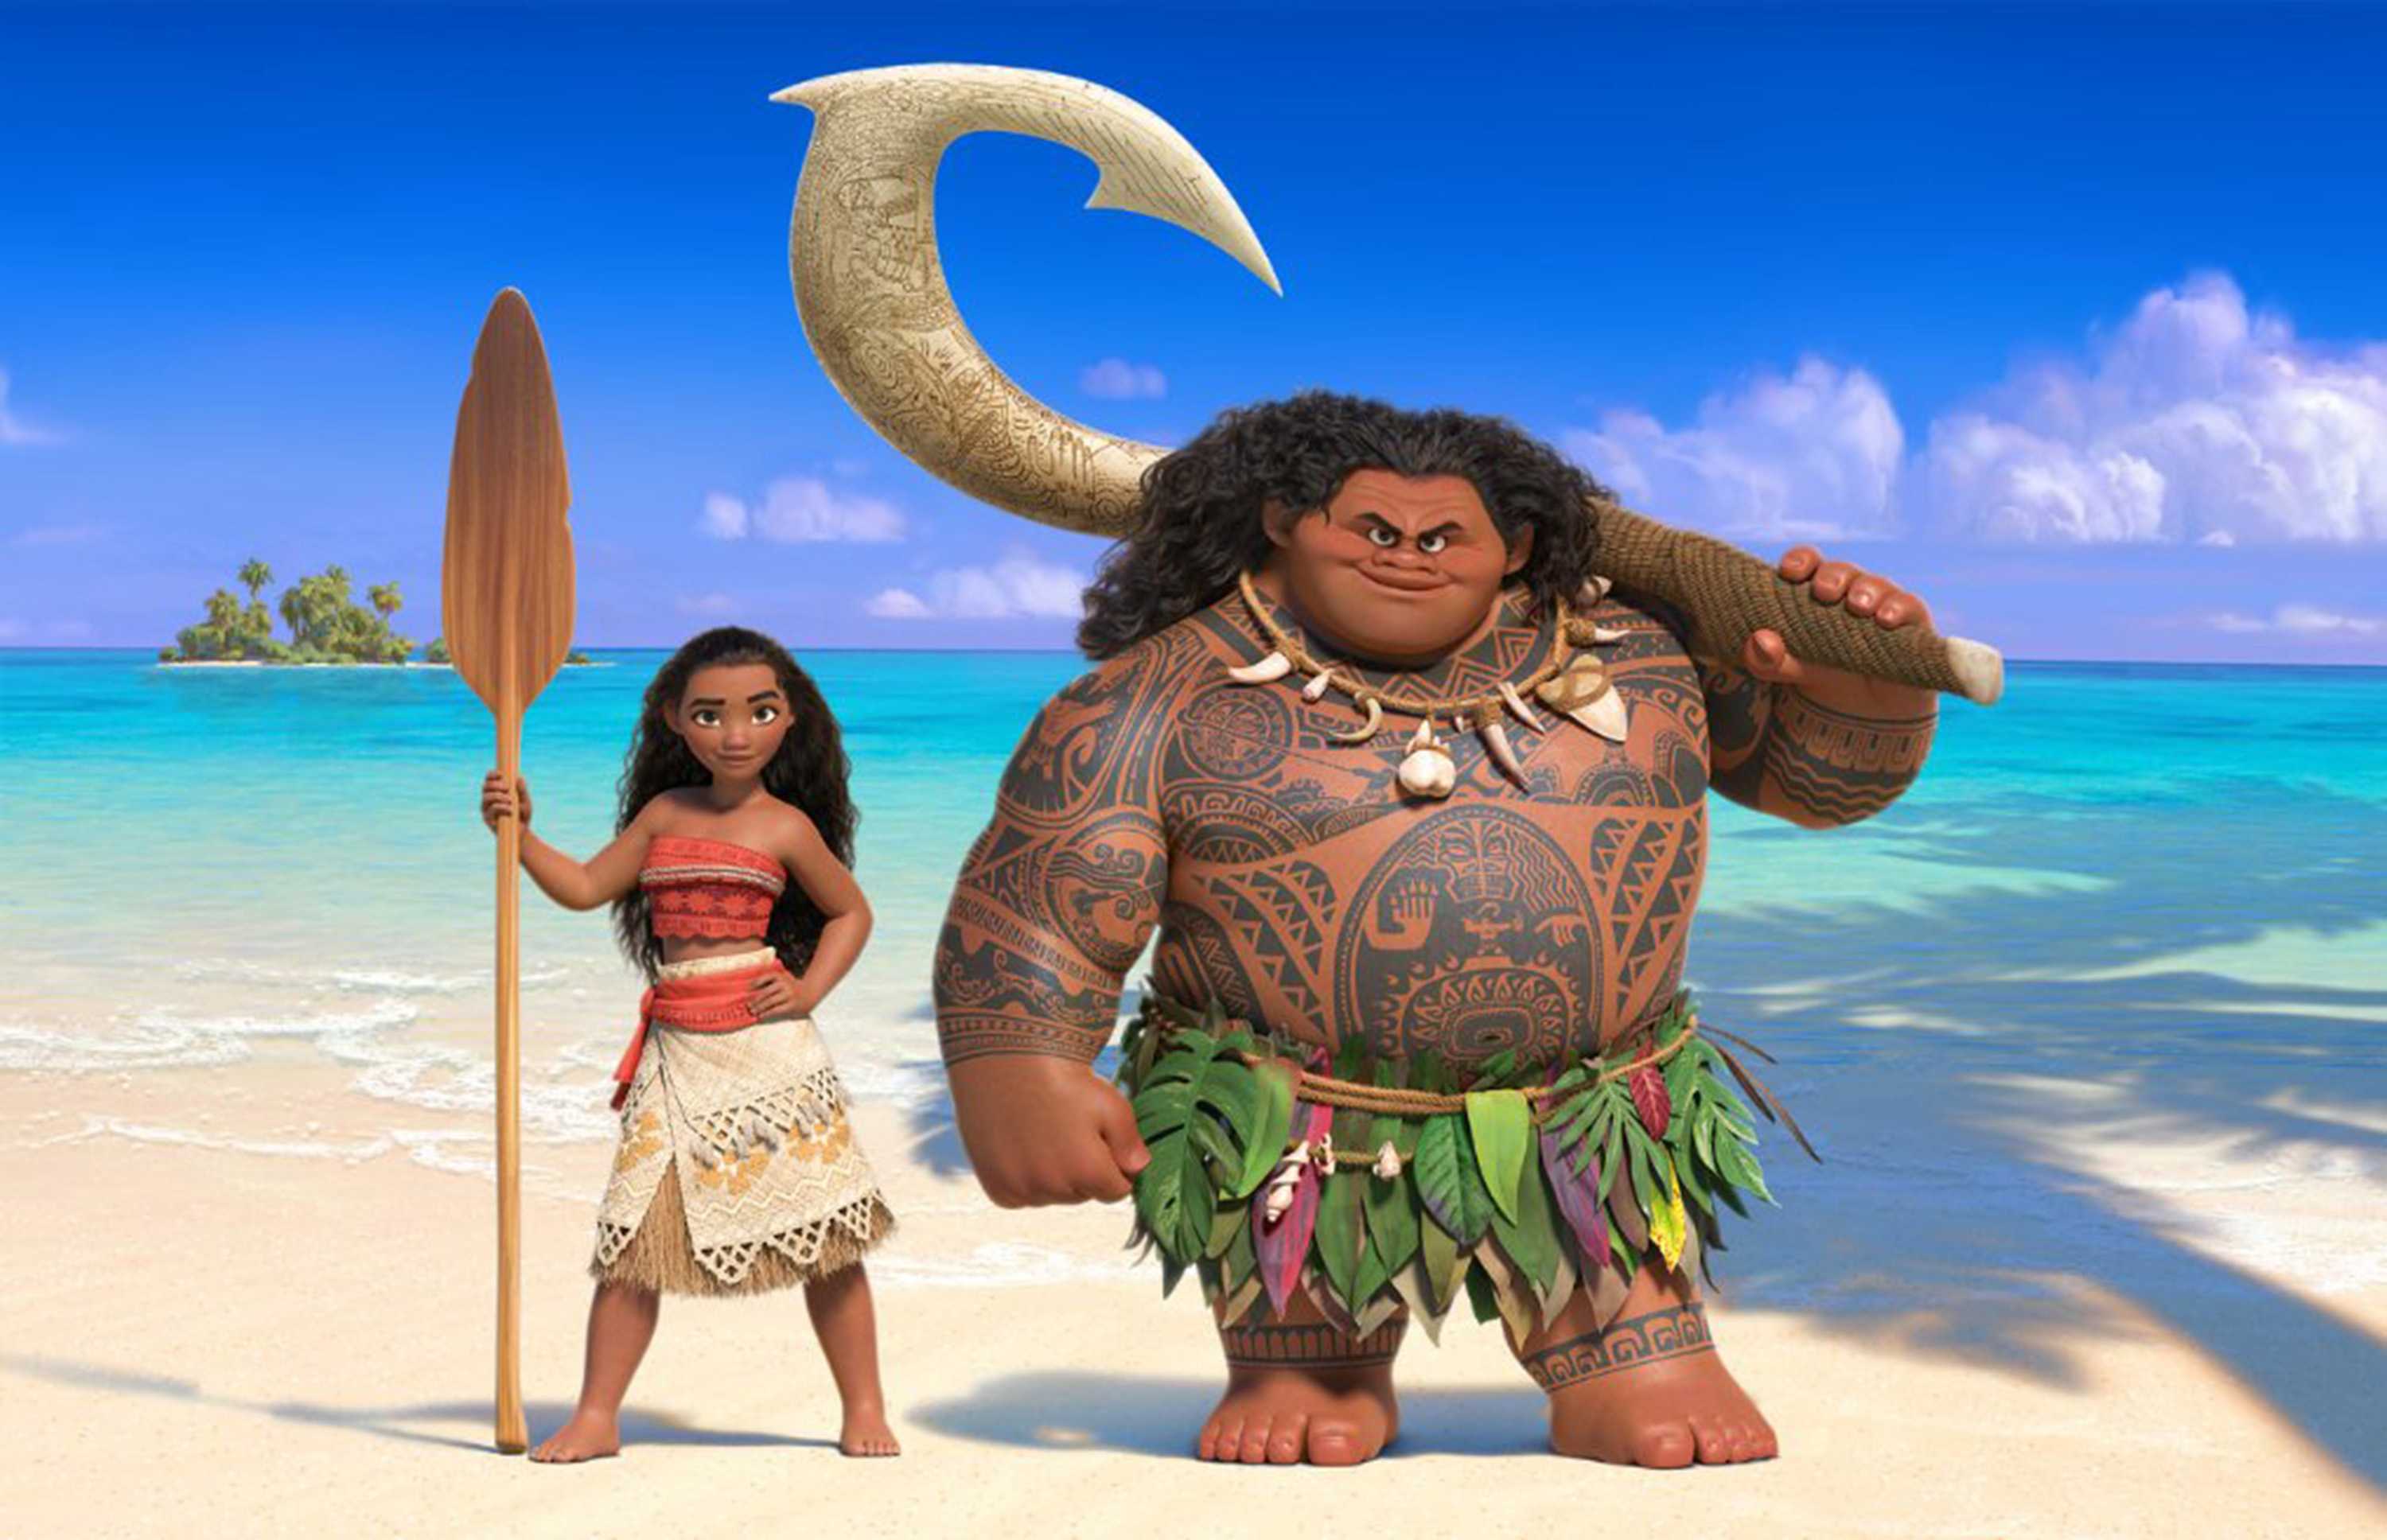 Still from disneys Moana shows the characters Moana and Maui in front of a beautiful beach